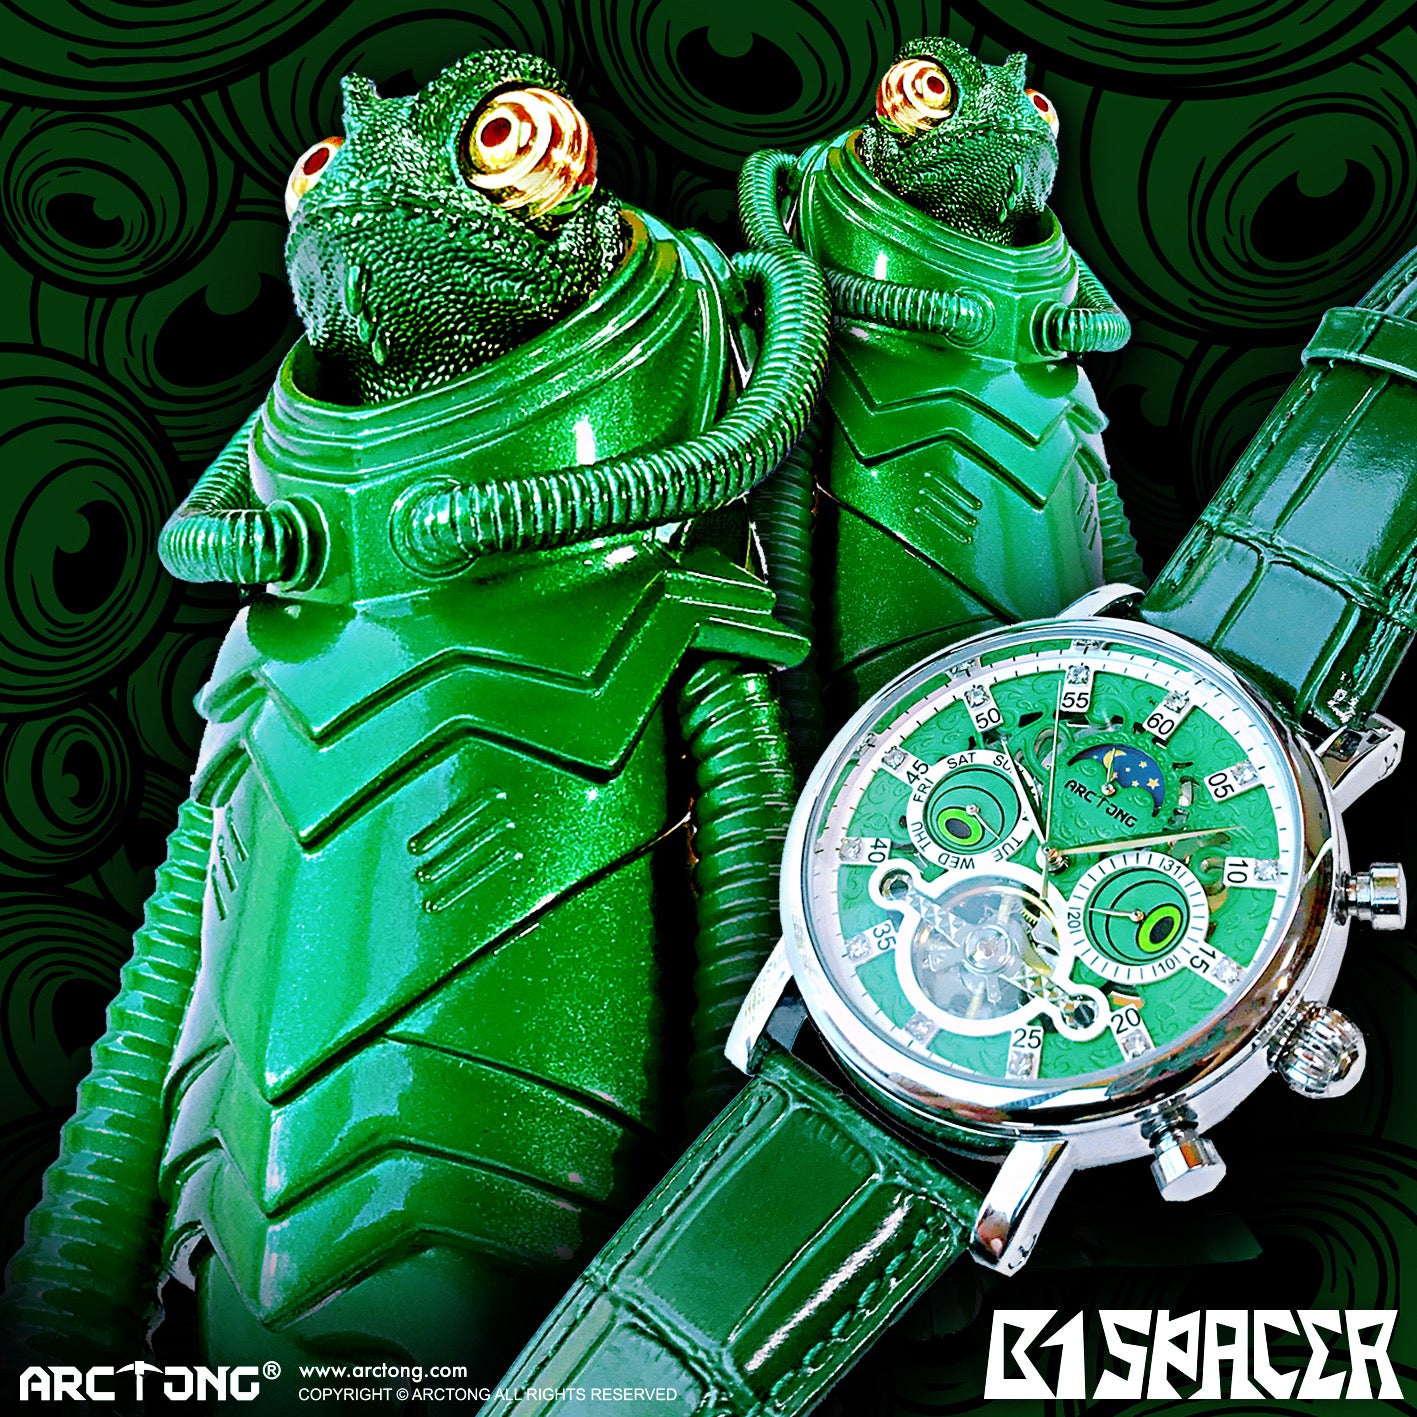 ARCTONG Green Spacer Watch NYCC Excl 25.jpg